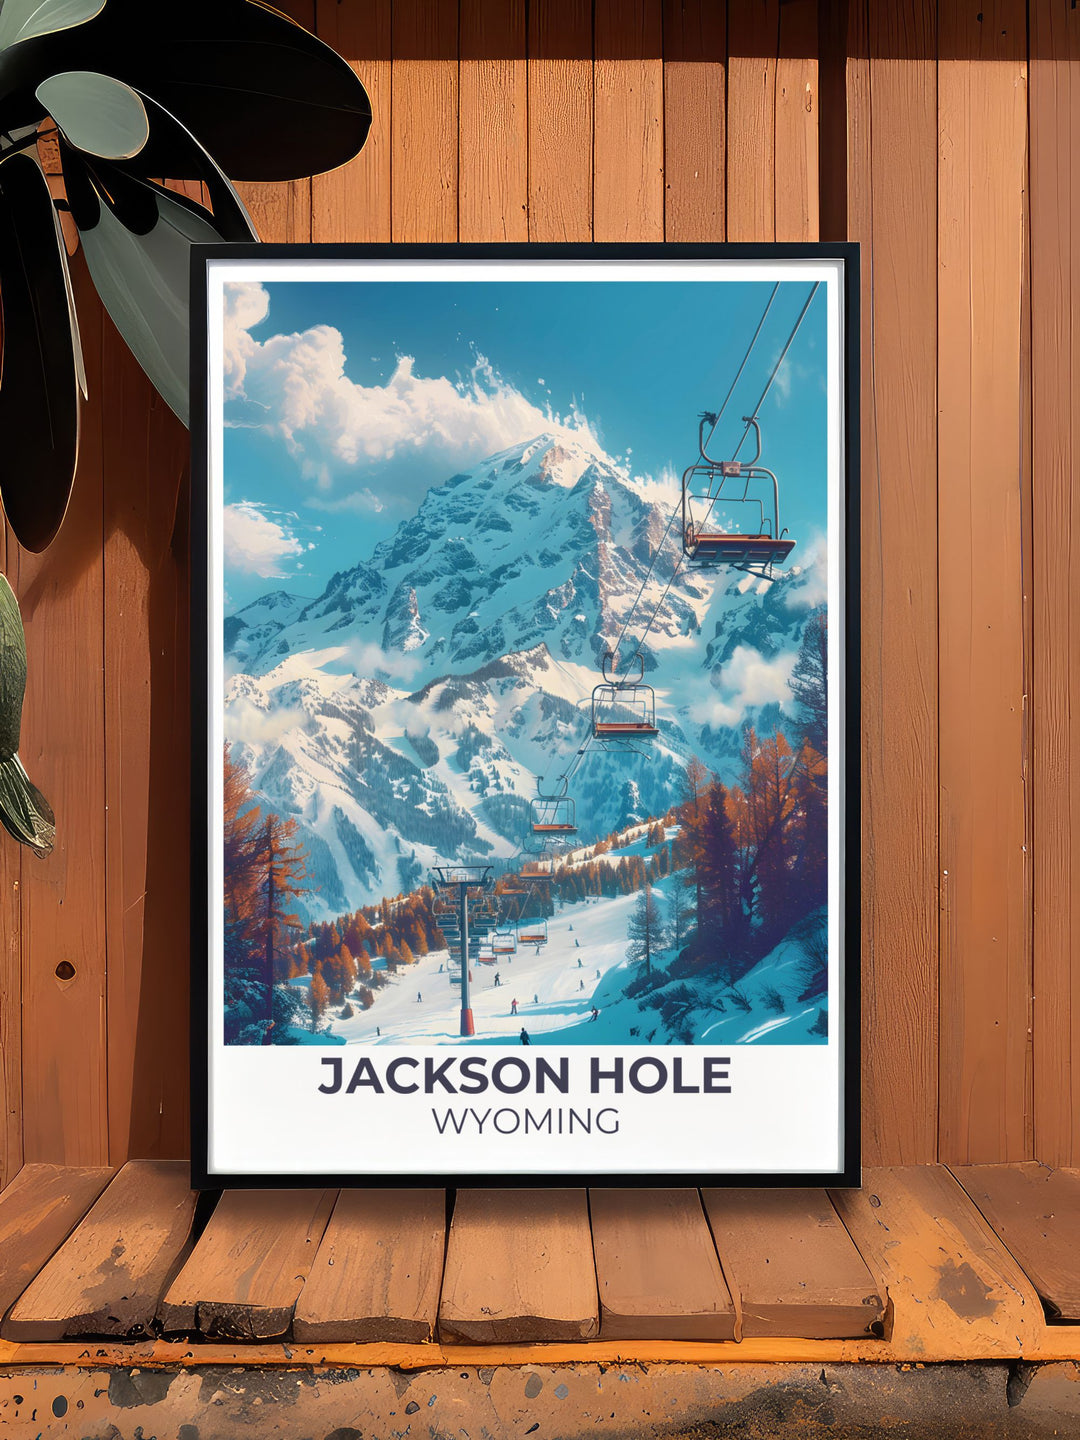 Customizable Jackson Hole art print featuring iconic landmarks like Rendezvous Mountain for a personal touch